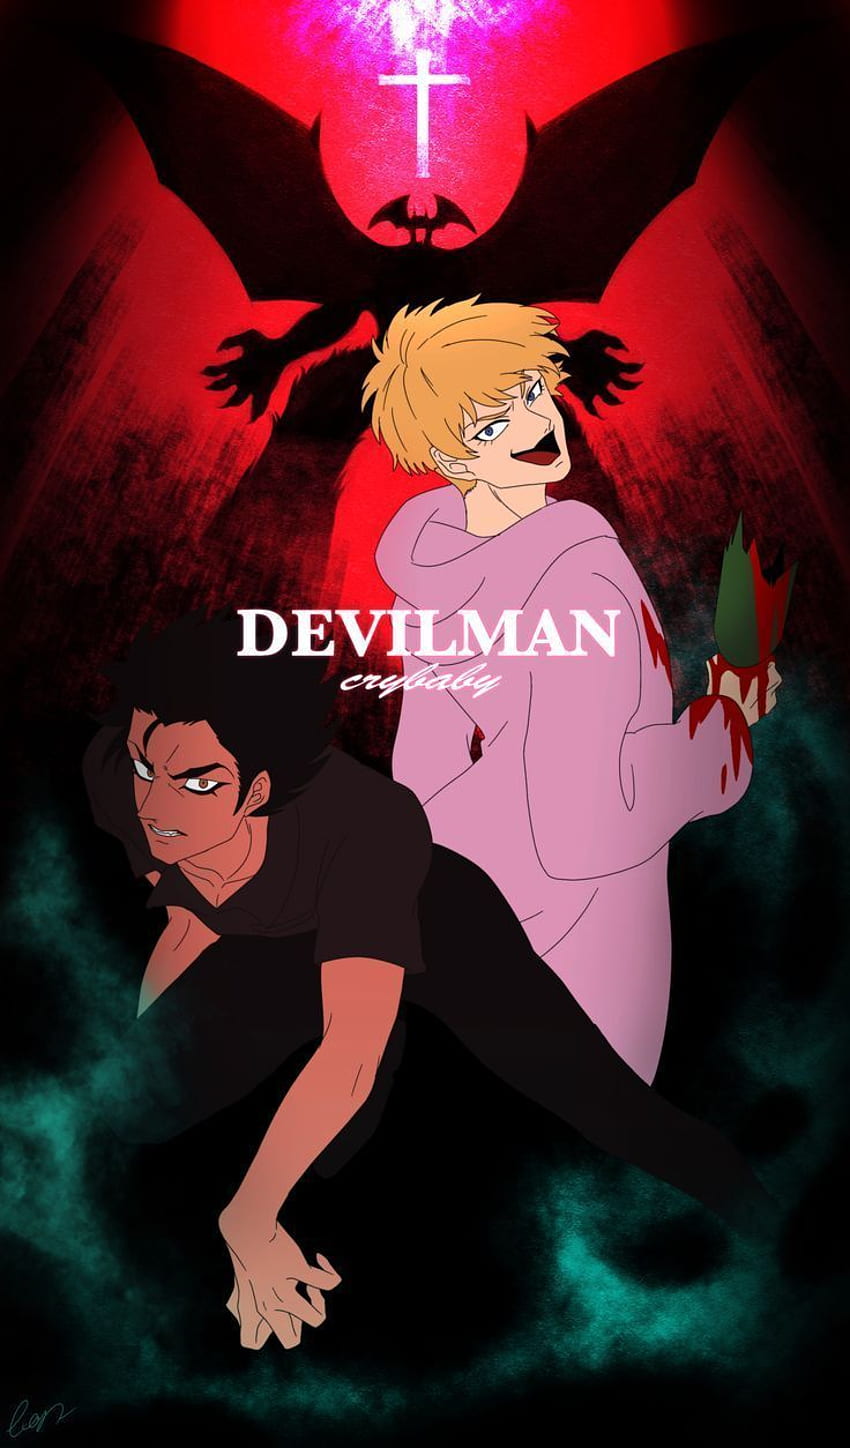 AOHOG Devilman Crybaby Wallpaper 1080p Canvas Art Poster and Wall Art  Picture Print Modern Family Room Decor Poster 12 x 18 Inches 30 x 45 cm   Amazonde Home  Kitchen